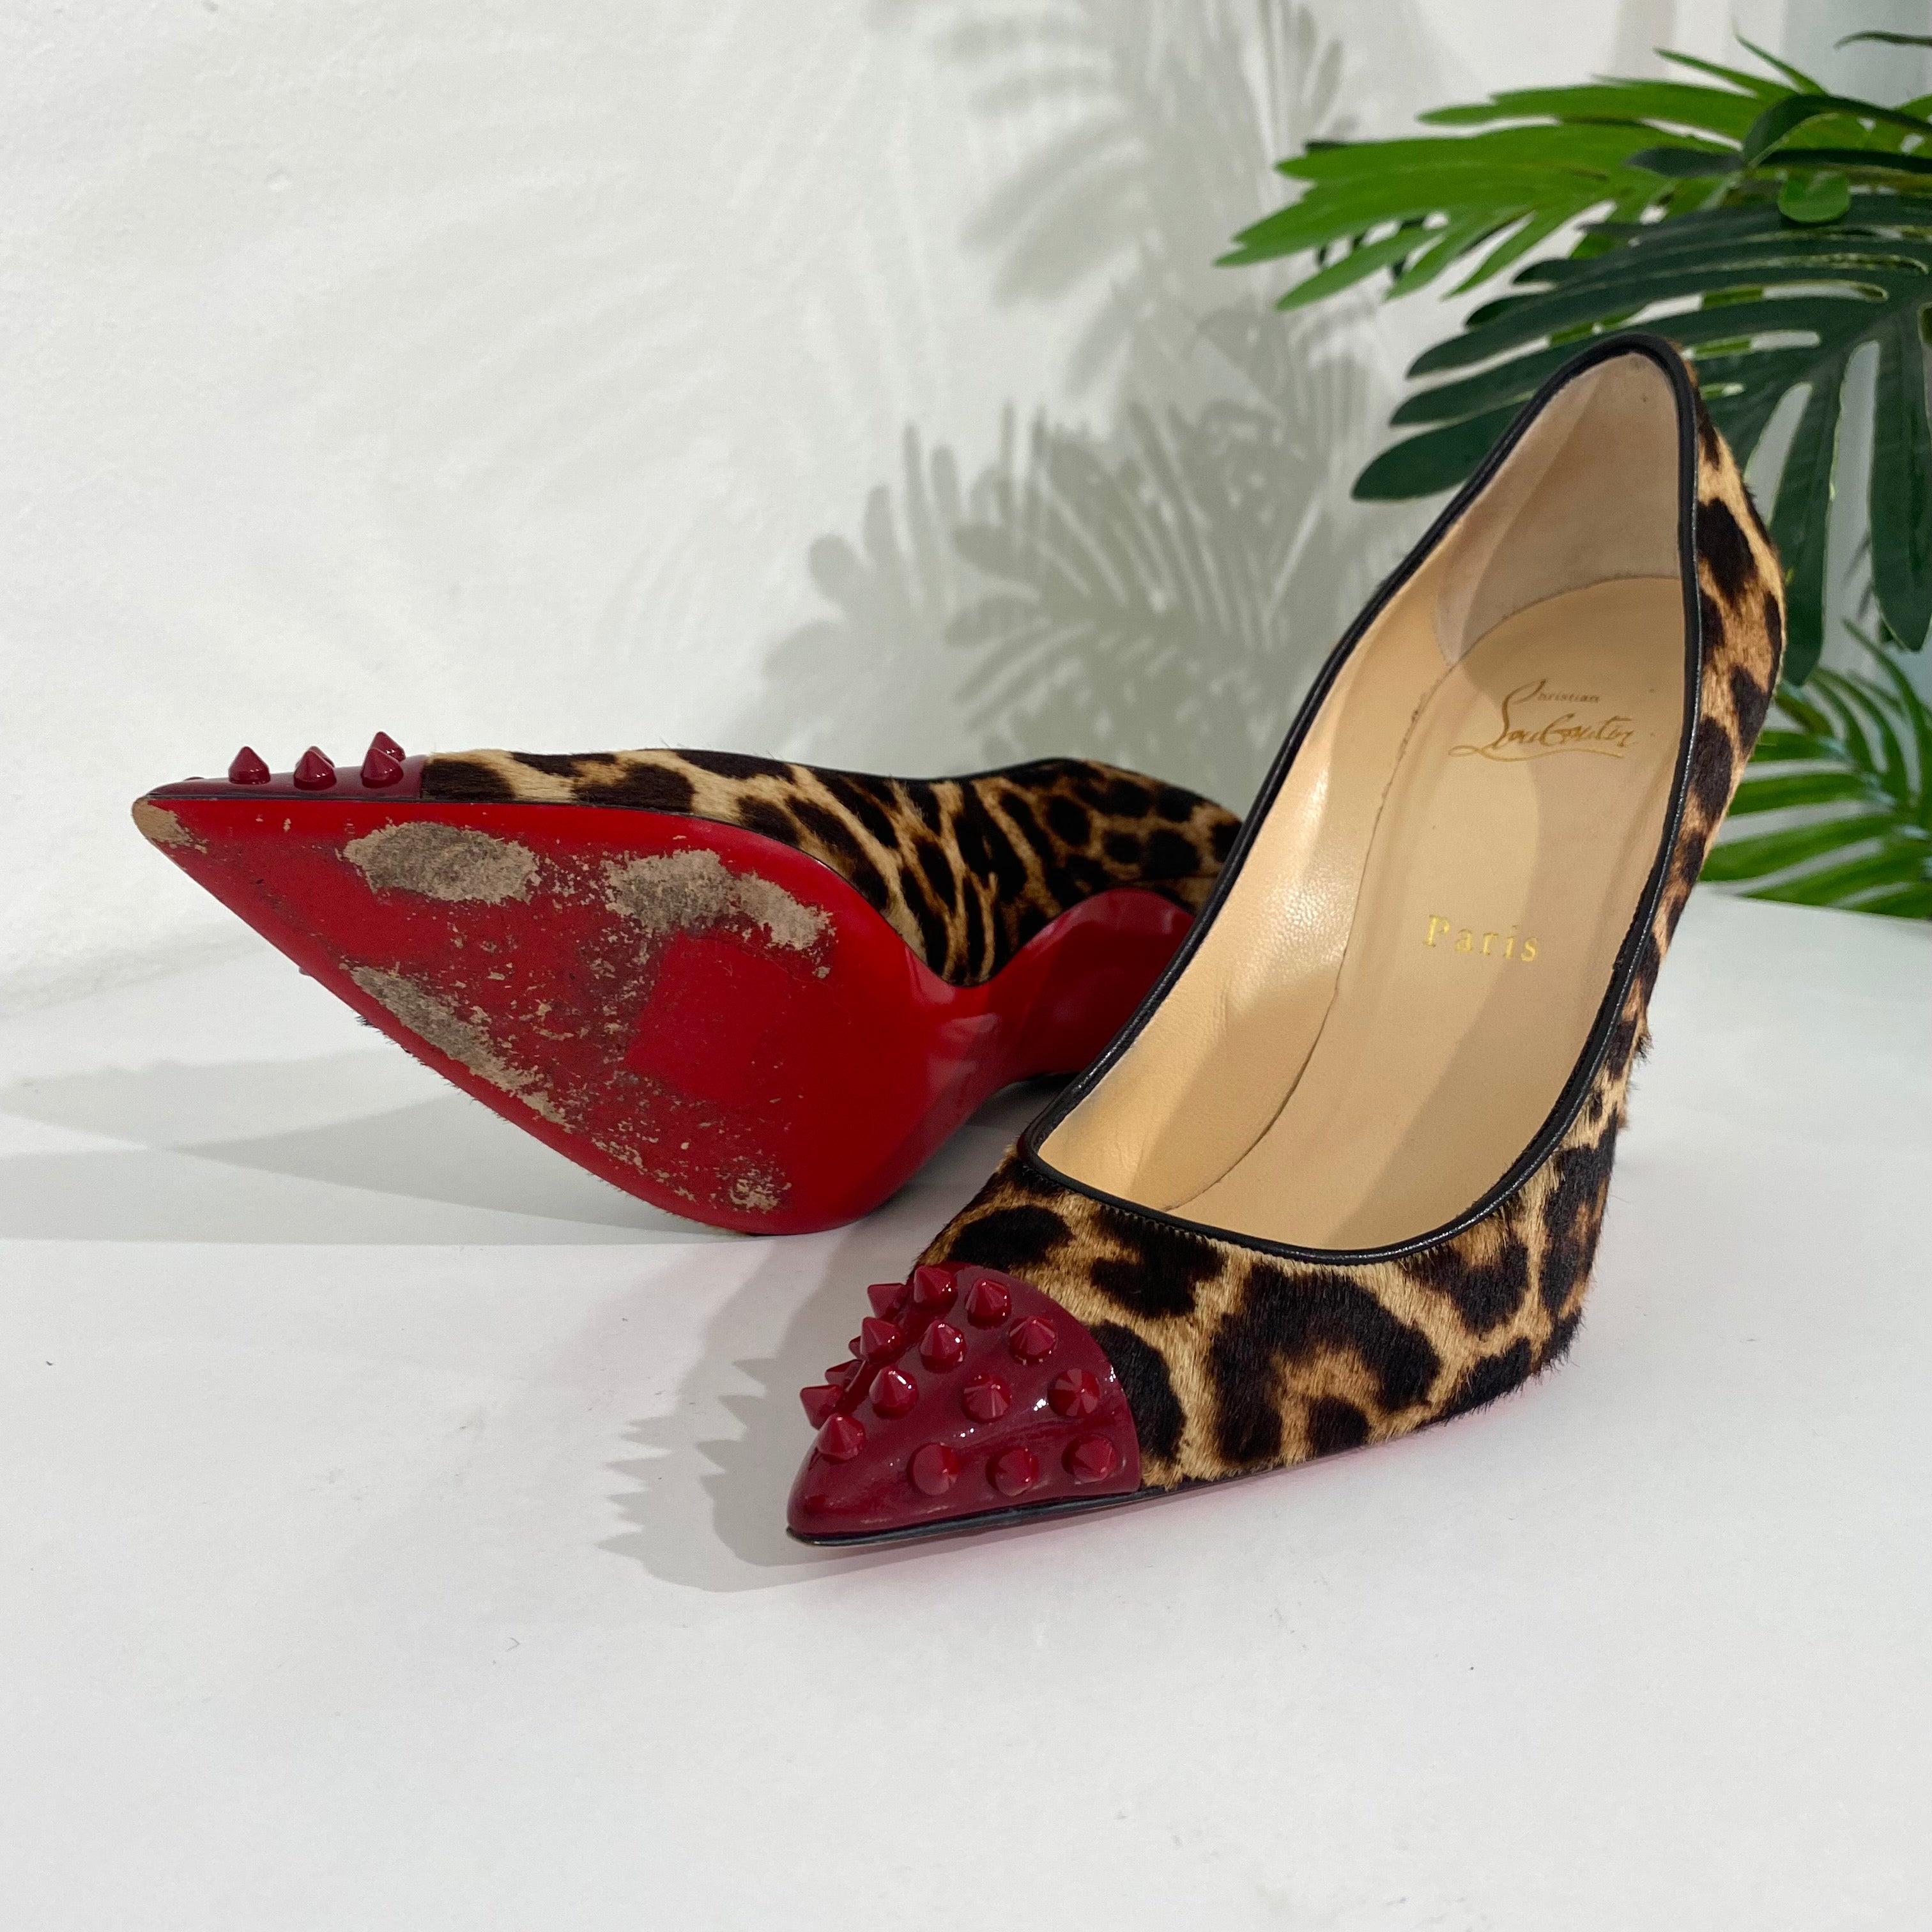 Christian Louboutin Red Spike Leopard Pumps